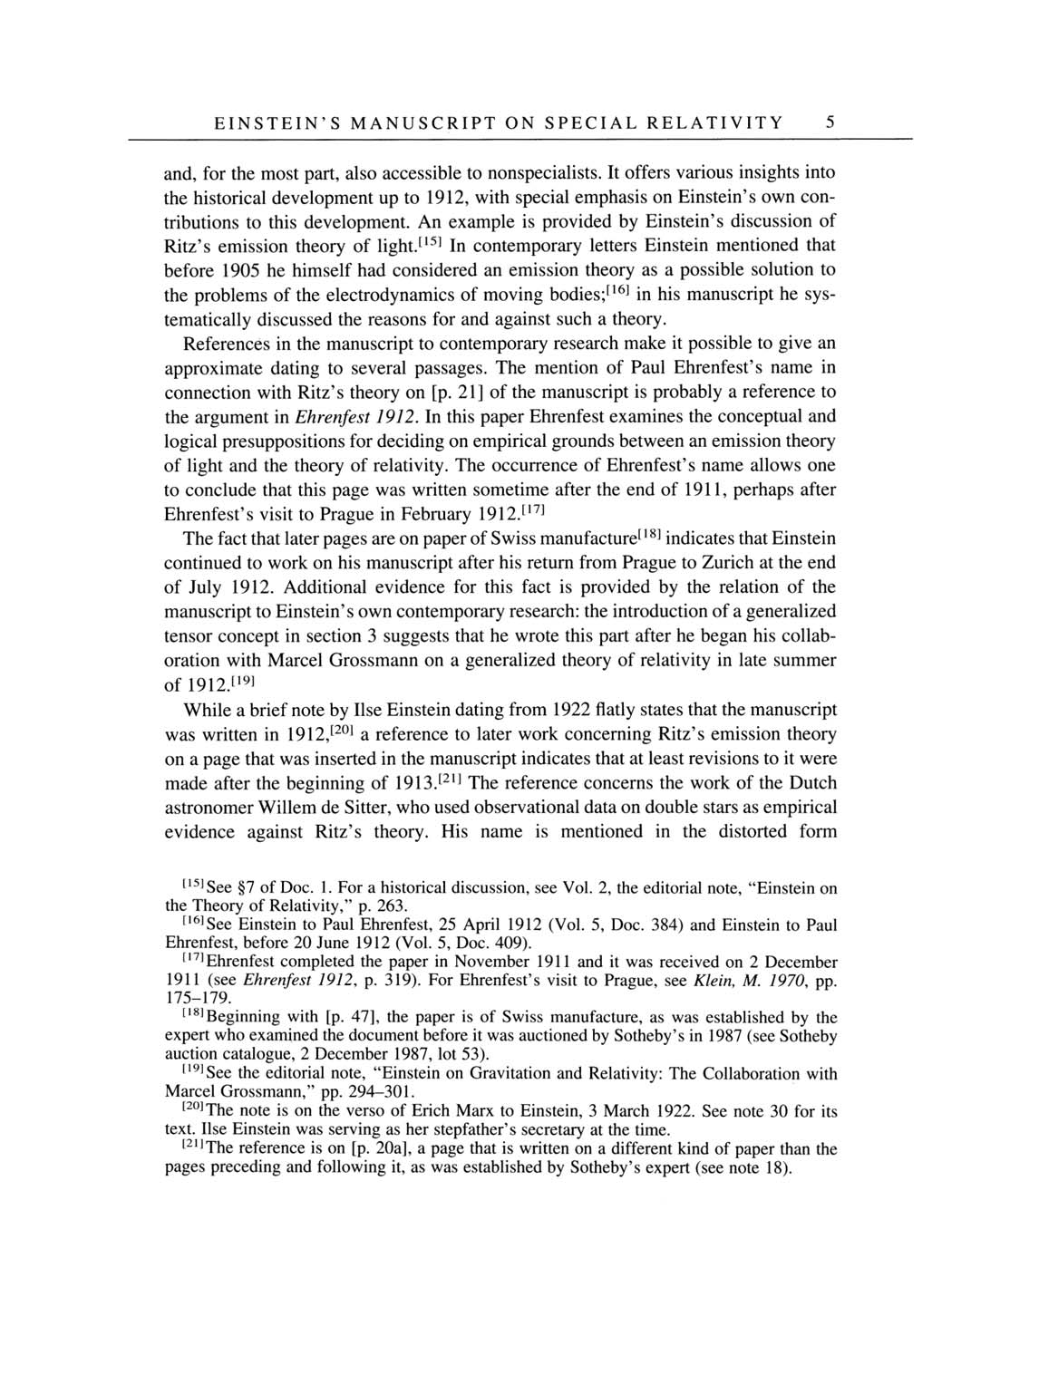 Volume 4: The Swiss Years: Writings 1912-1914 page 5